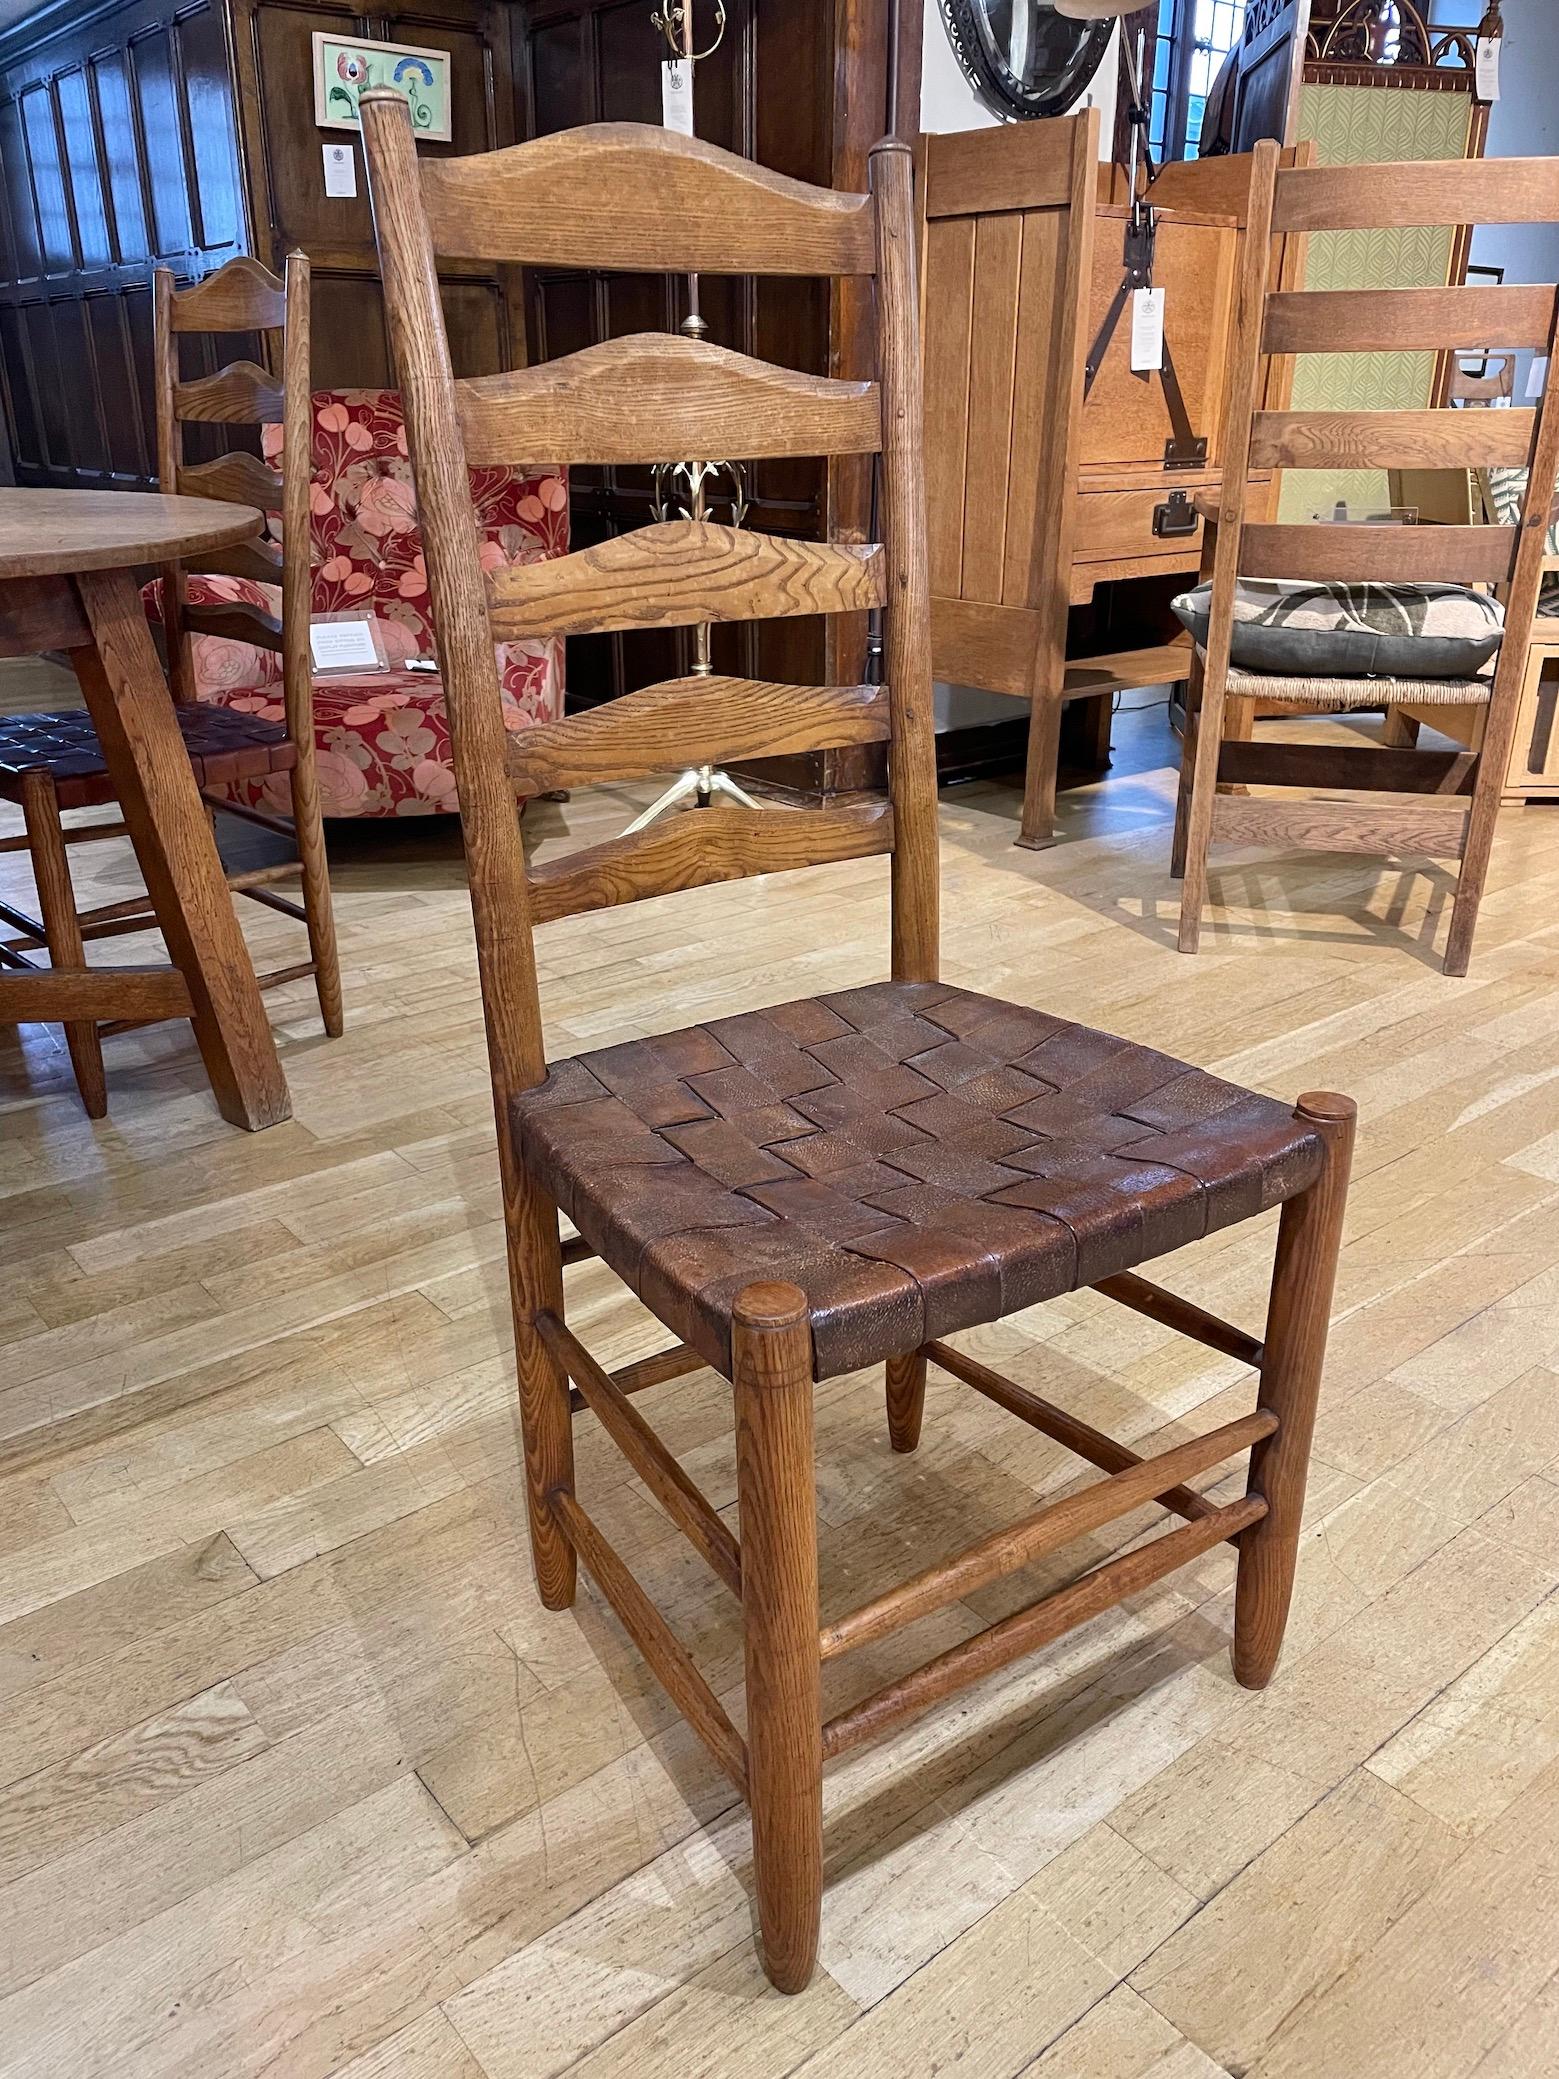 Rare set of four Arts and Crafts Cotswold School ladder back dining chairs by Gordon Russell. Ash with woven leather seats. 
We have cleaned the chairs with wax and have replaced 3 of the seats traditionally using high quality natural leather hide